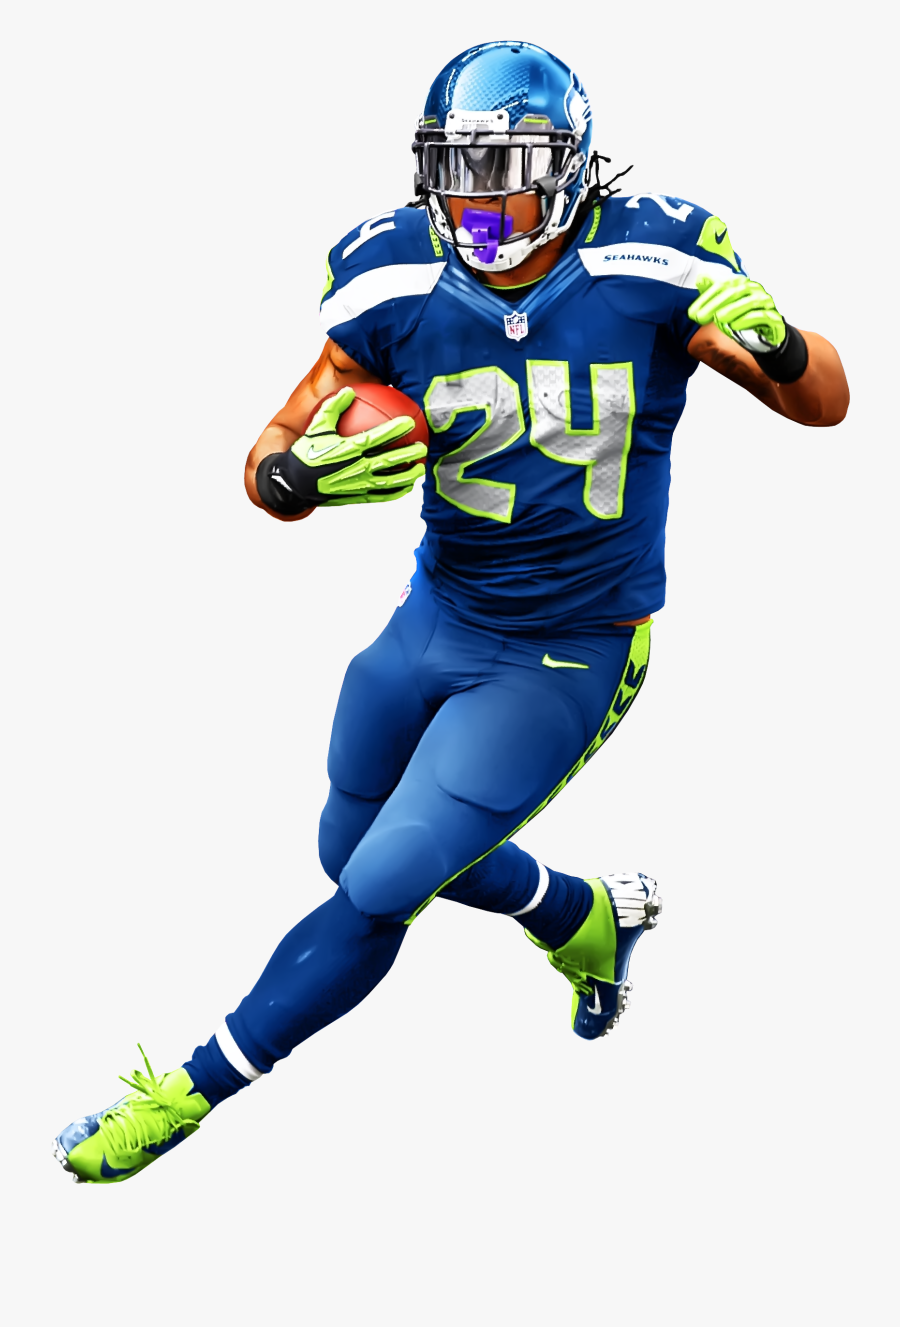 American Football Player Png Image - Marshawn Lynch Png, Transparent Clipart